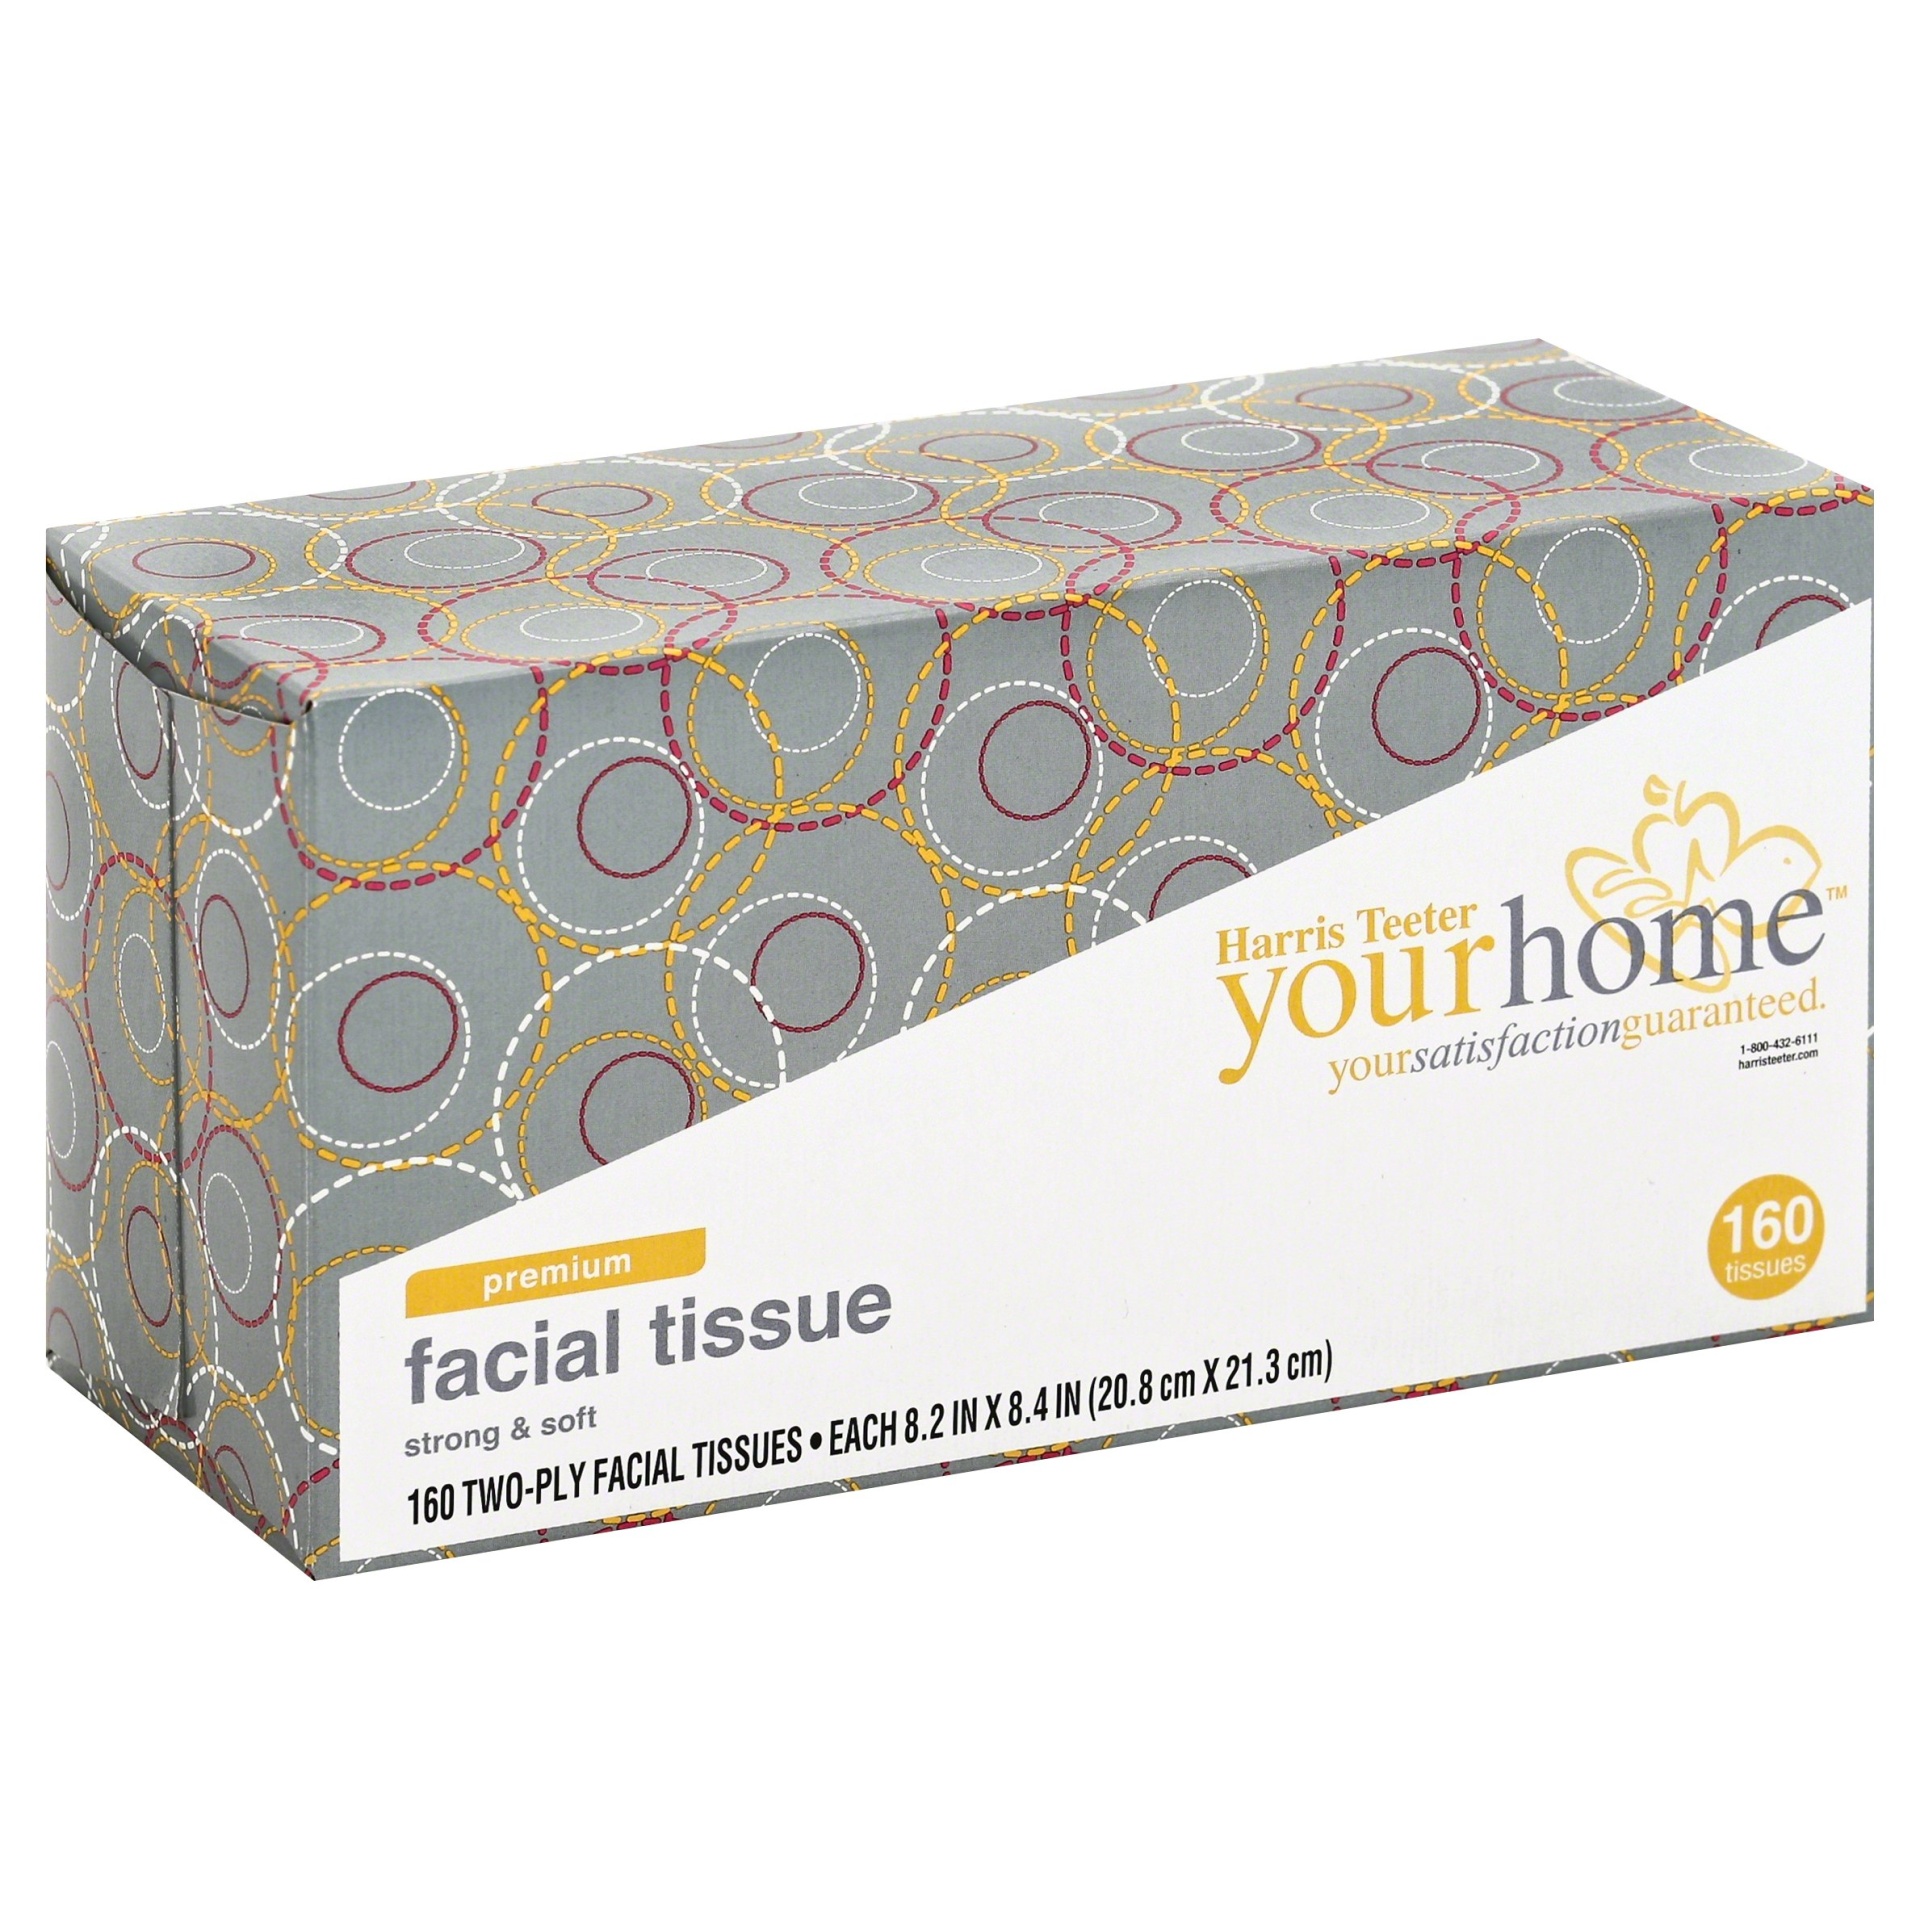 slide 1 of 4, Harris Teeter yourhome Two-Ply Premium Facial Tissue, 160 ct